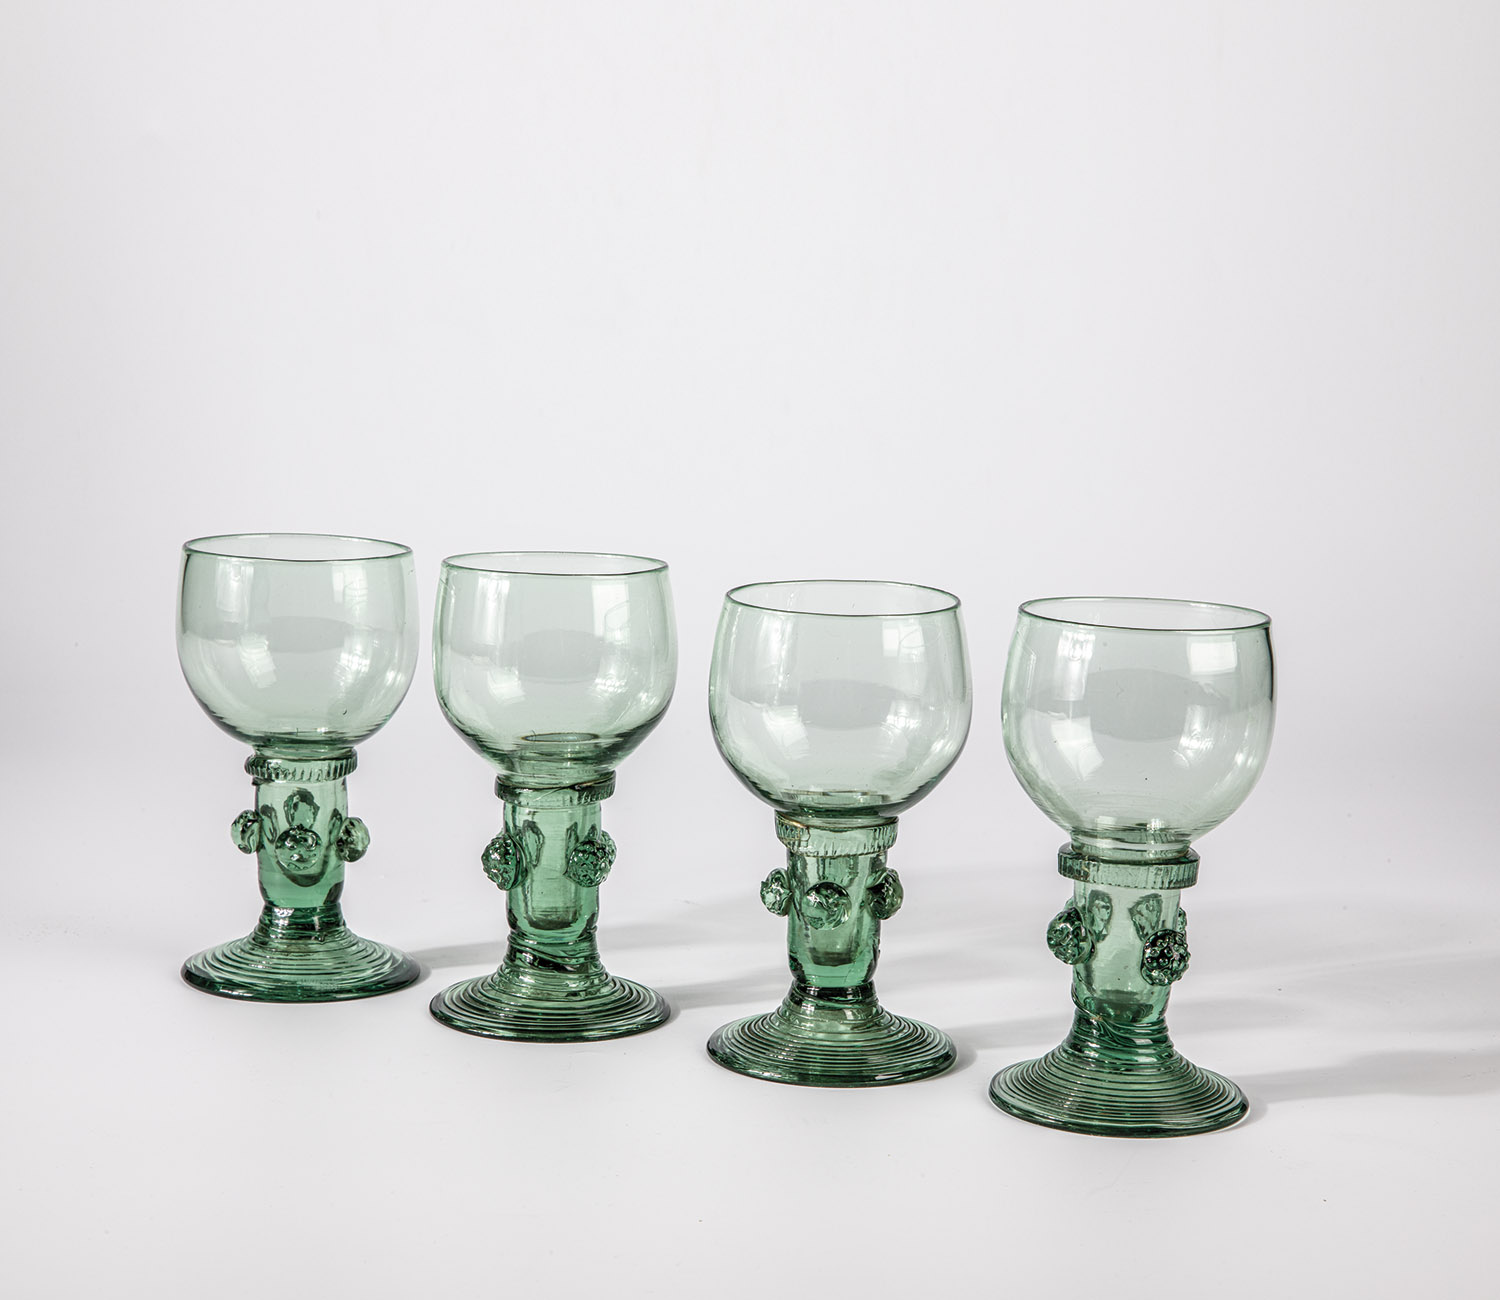 Four Romans German, 18th century Green glass with demolition. Slightly rising, spun foot. Hollow